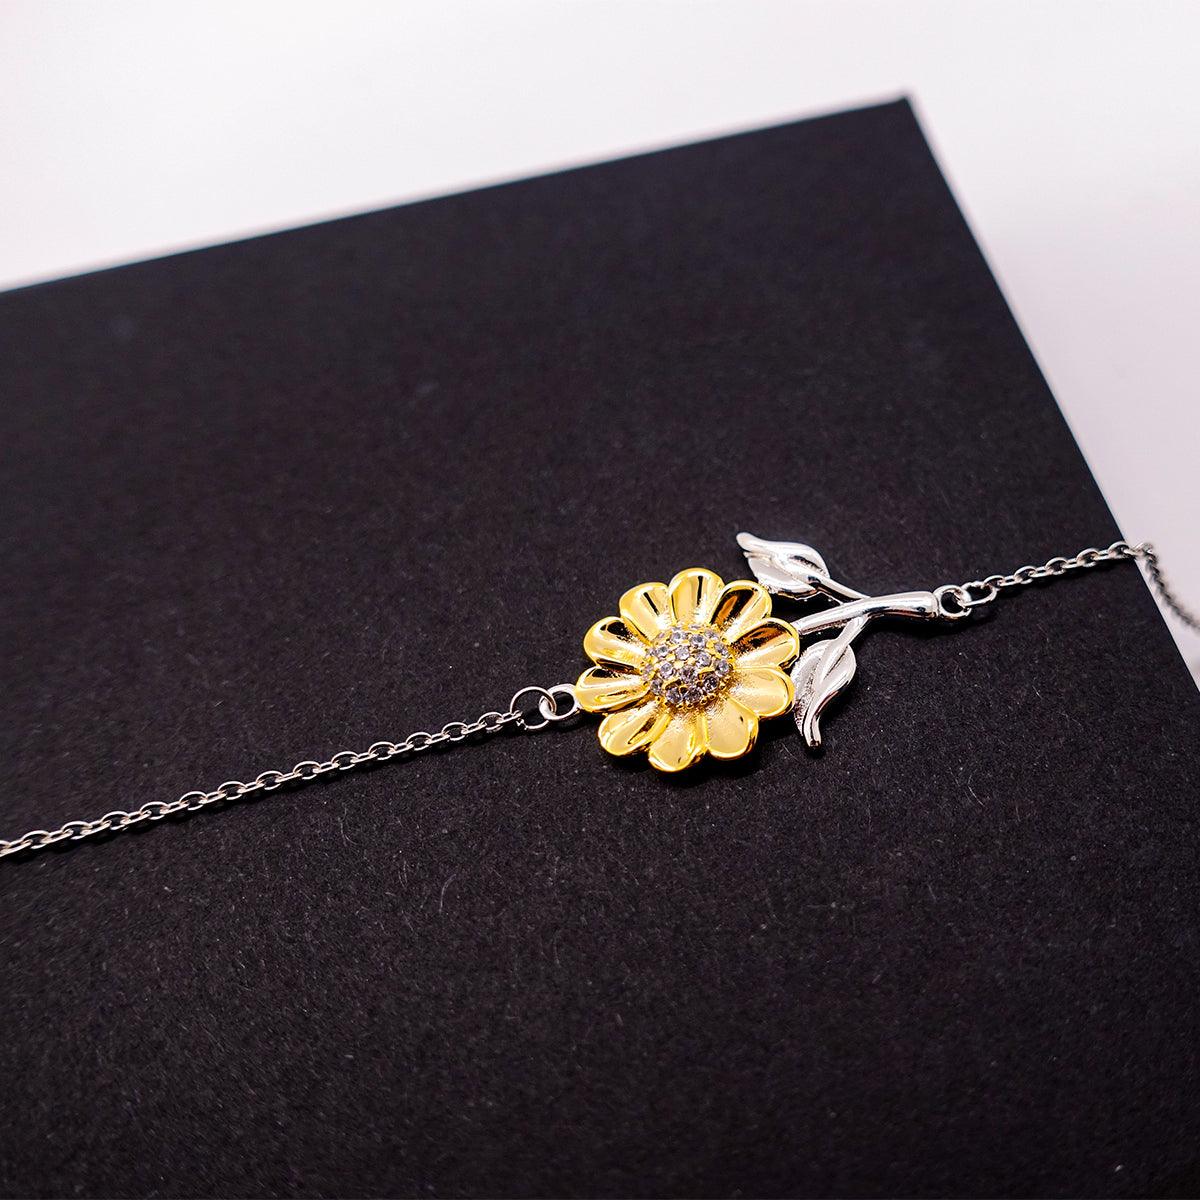 Remarkable Financial Advisor Gifts, Your dedication and hard work, Inspirational Birthday Christmas Unique Sunflower Bracelet For Financial Advisor, Coworkers, Men, Women, Friends - Mallard Moon Gift Shop